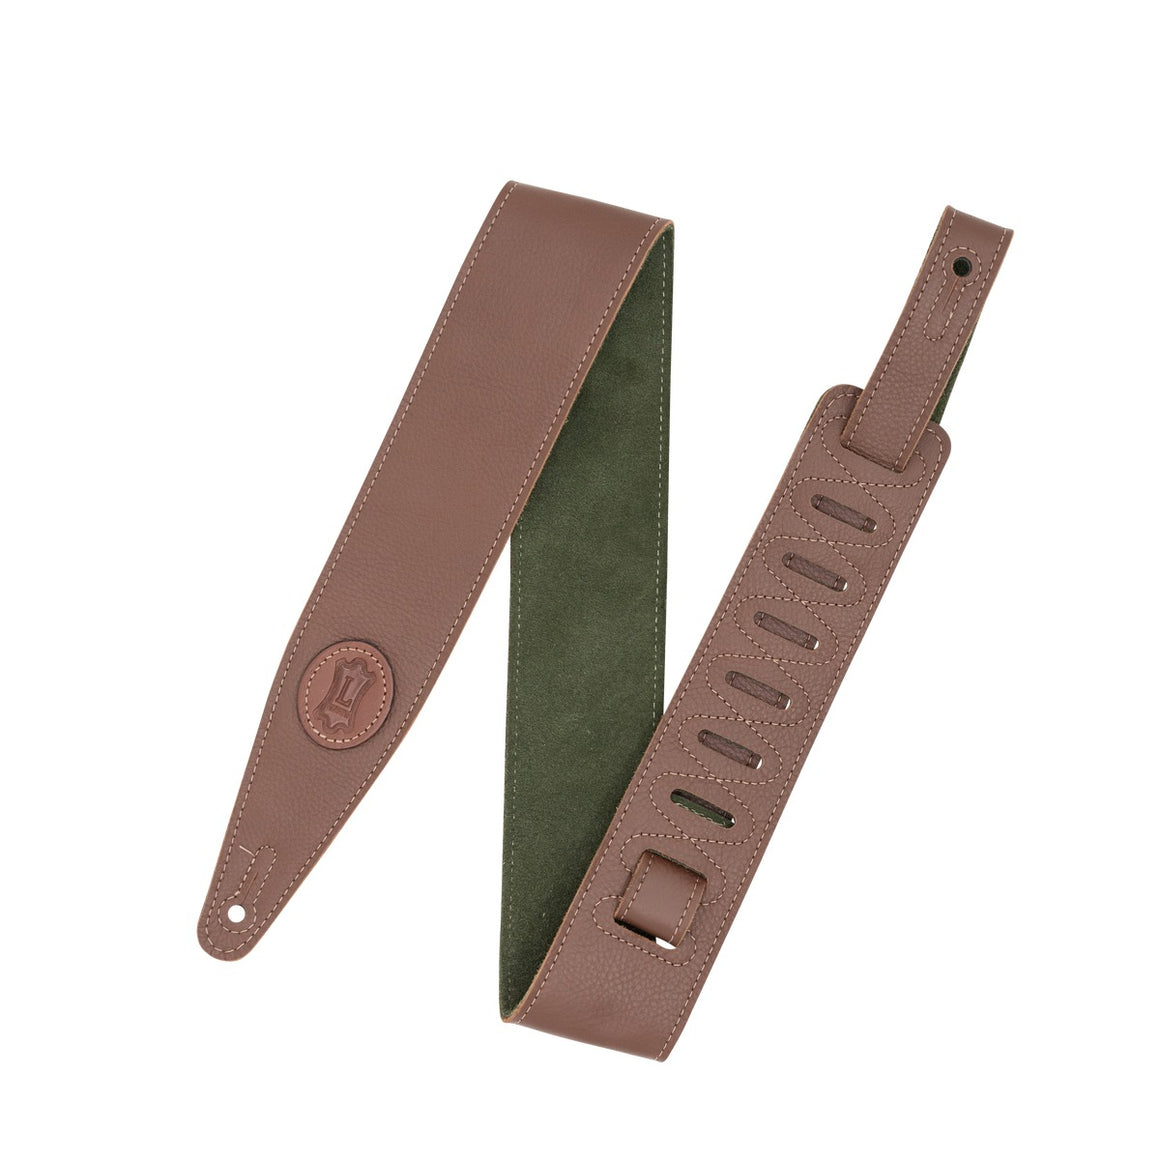 LEVYS MGS317STBRNGRN 2.5" Garment Leather Strap with Suede Backing